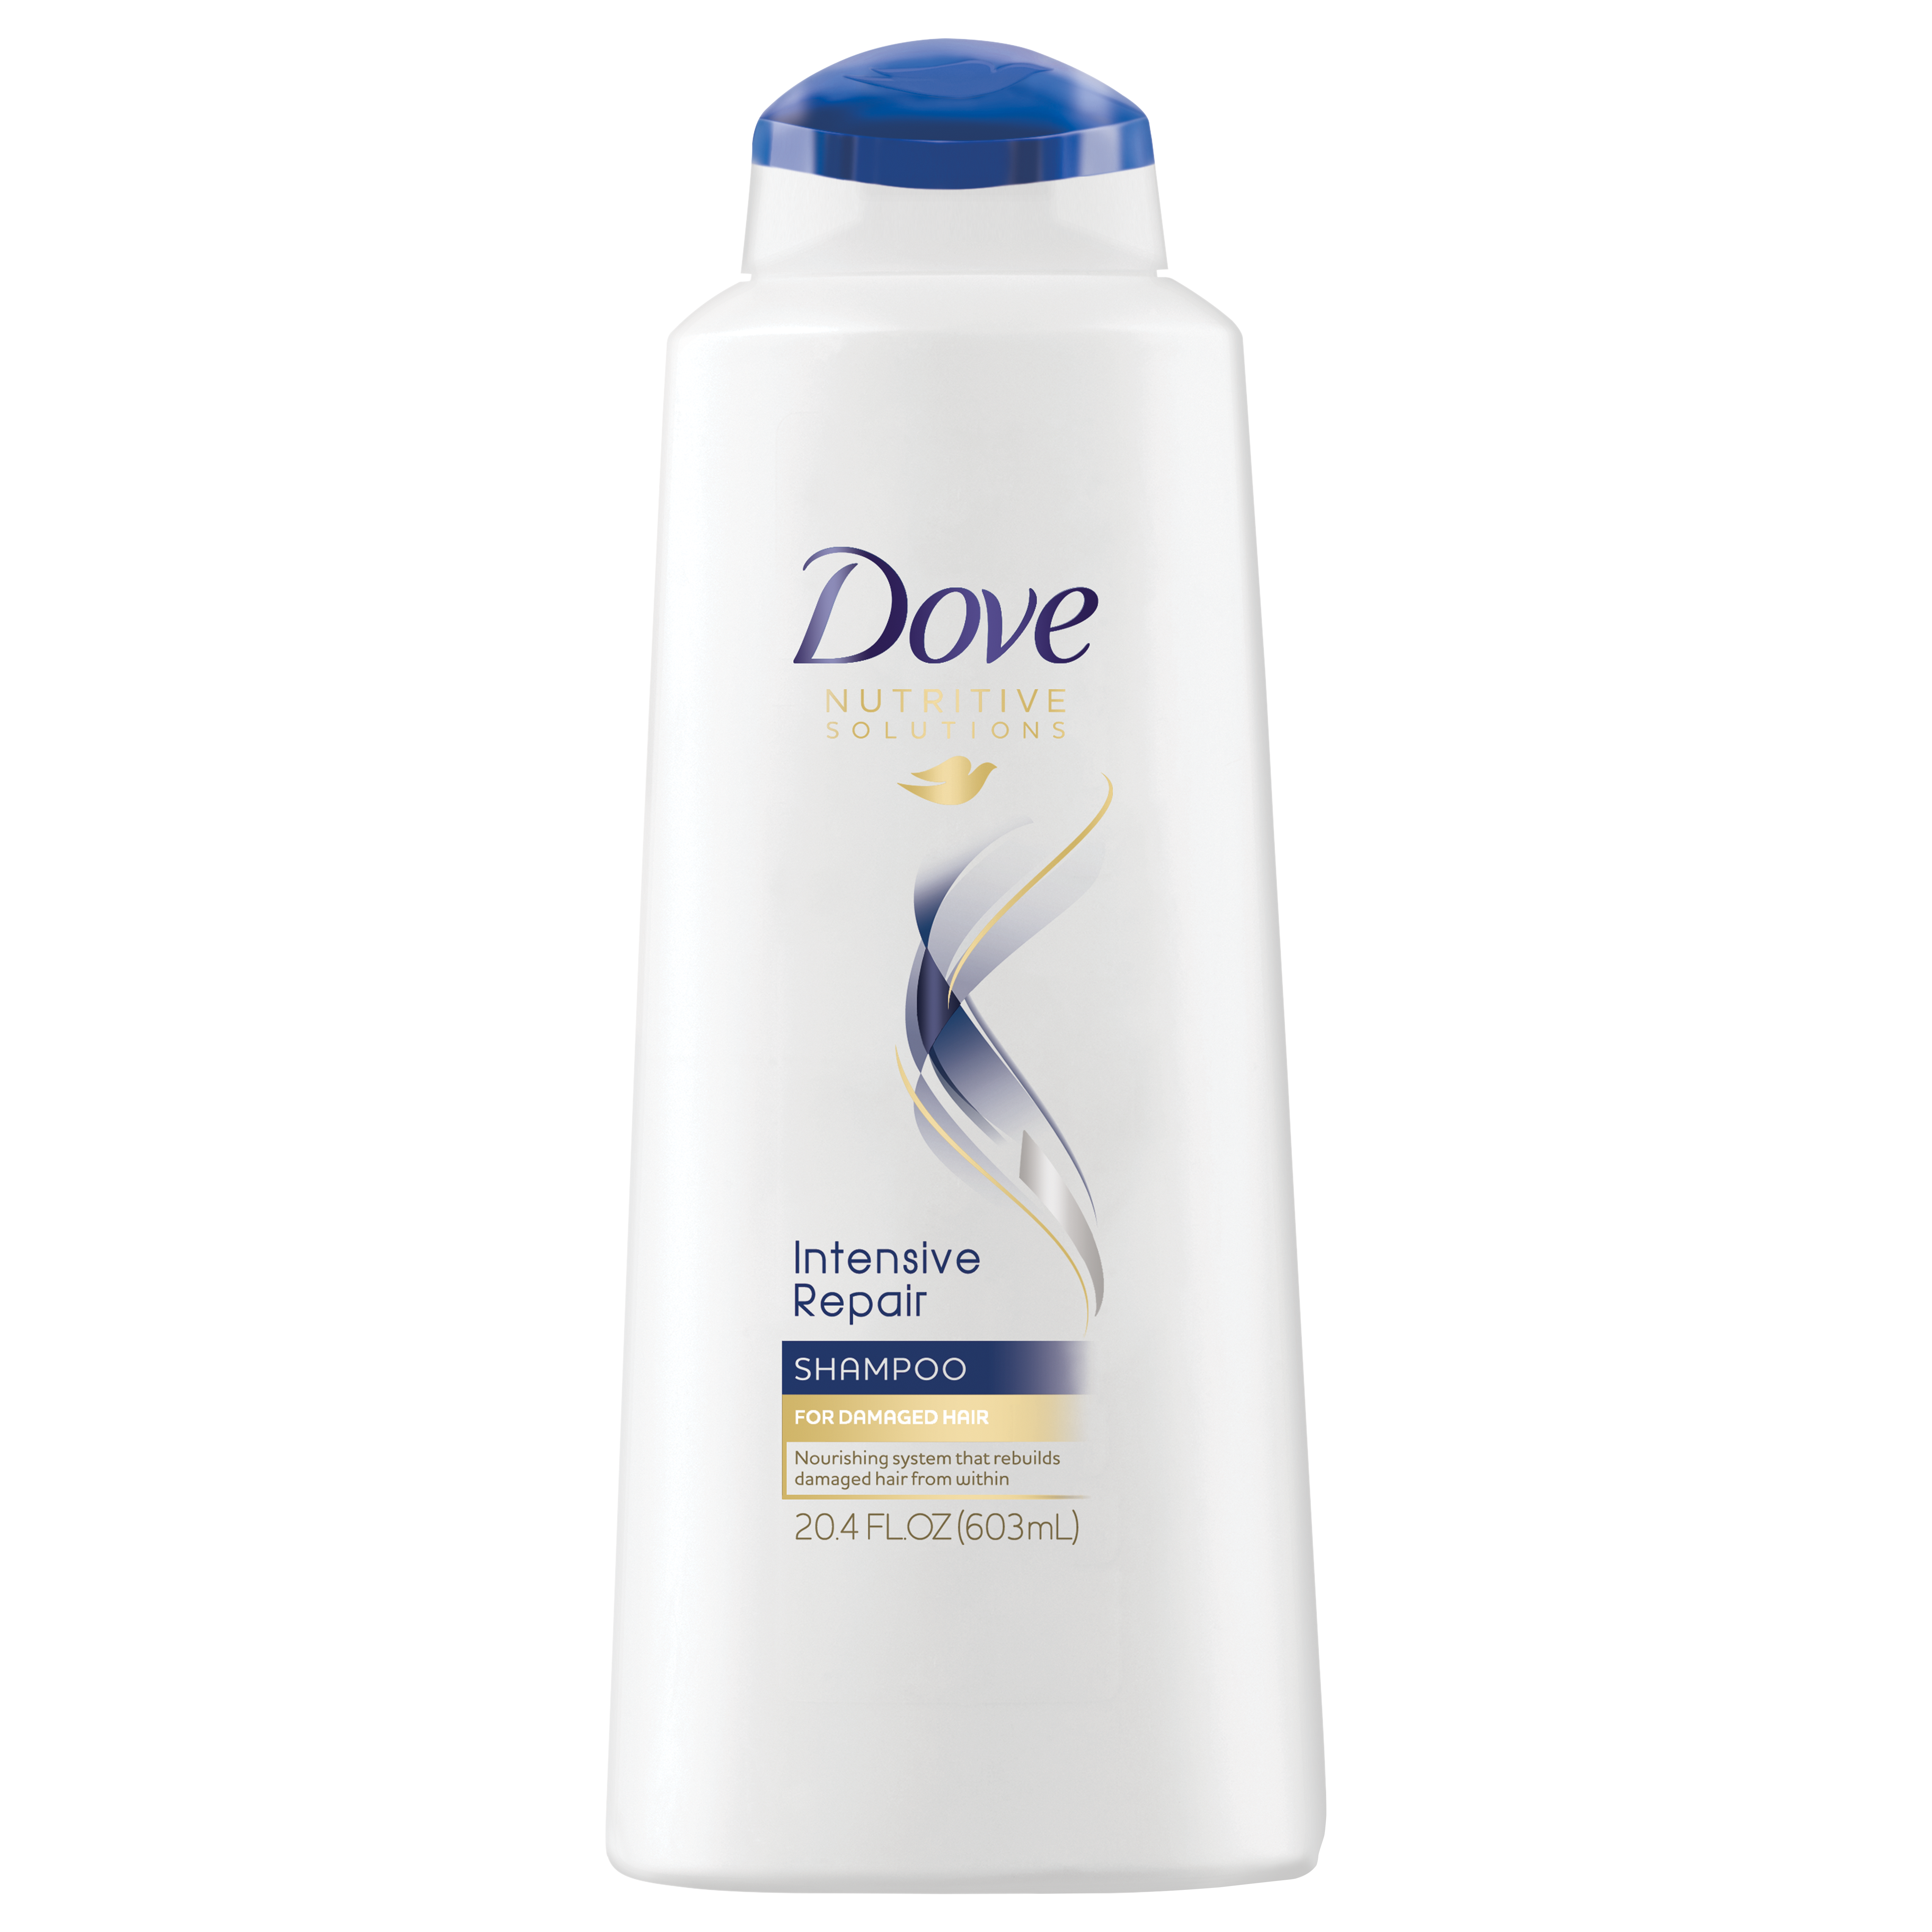 Hair products for all hair care needs - Dove